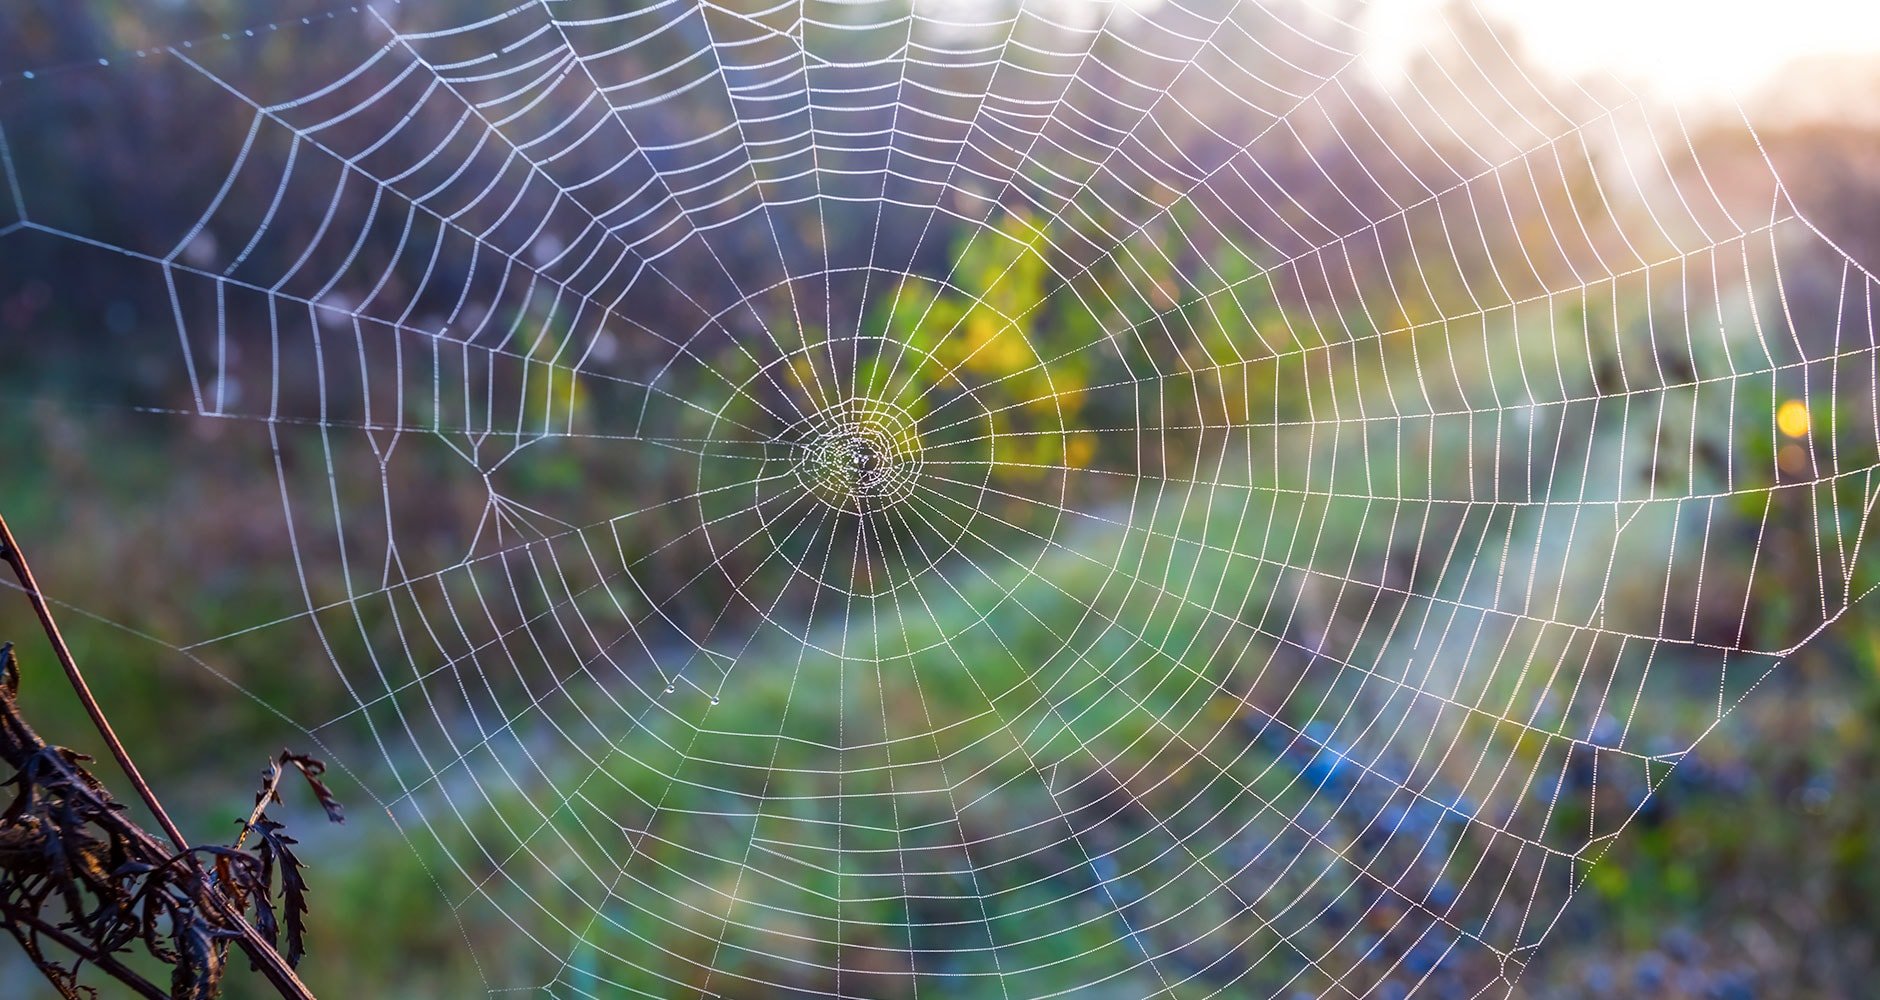 Orb-Weaver Spiders: Spooky Webs But Great For Pest Control - Farmers'  Almanac - Plan Your Day. Grow Your Life.